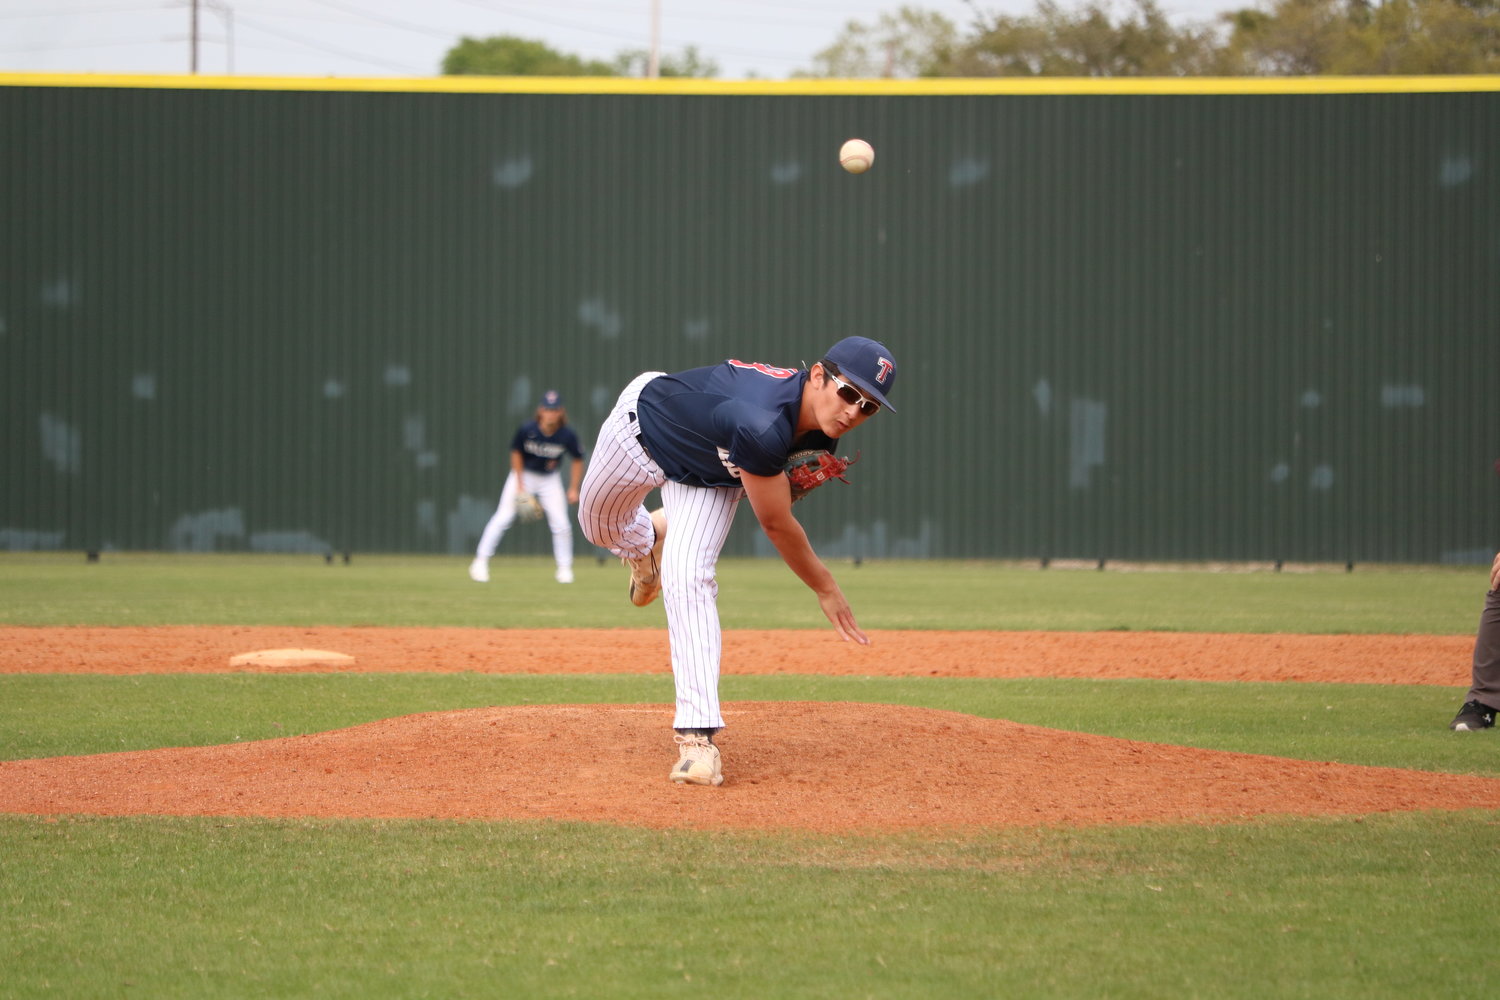 Daniel Deaton pitches during Tuesday's game between Tompkins and Cinco Ranch at the Cinco Ranch baseball field.